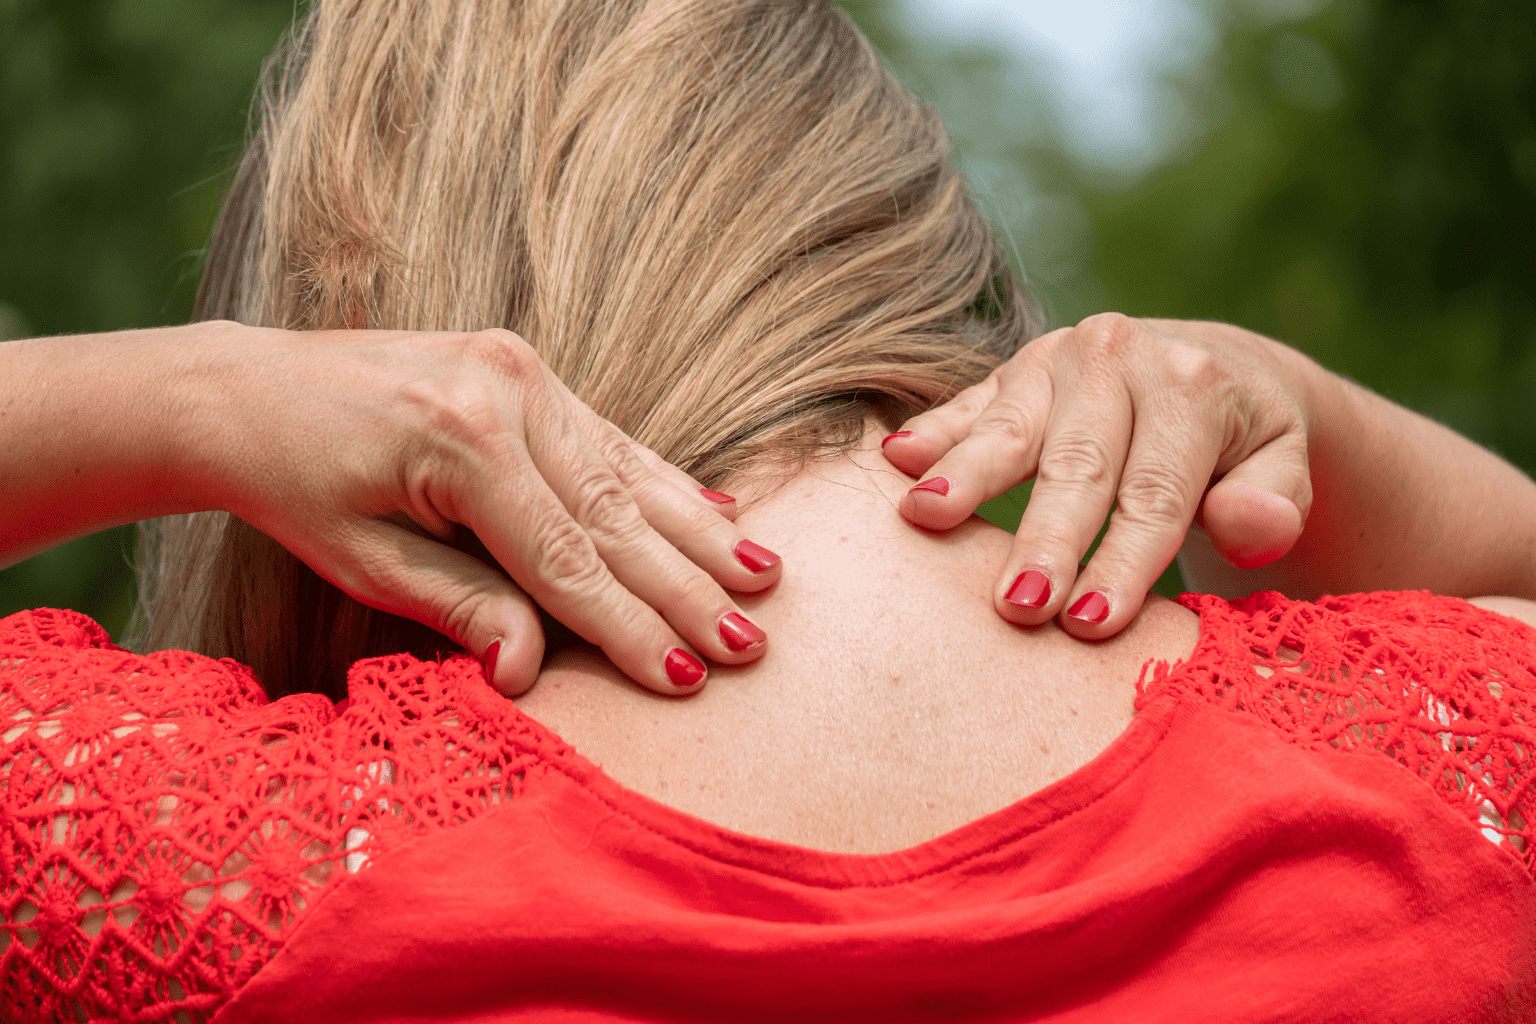 How Can I Help My Neck Pain?, Neck Pain and Stiff Neck